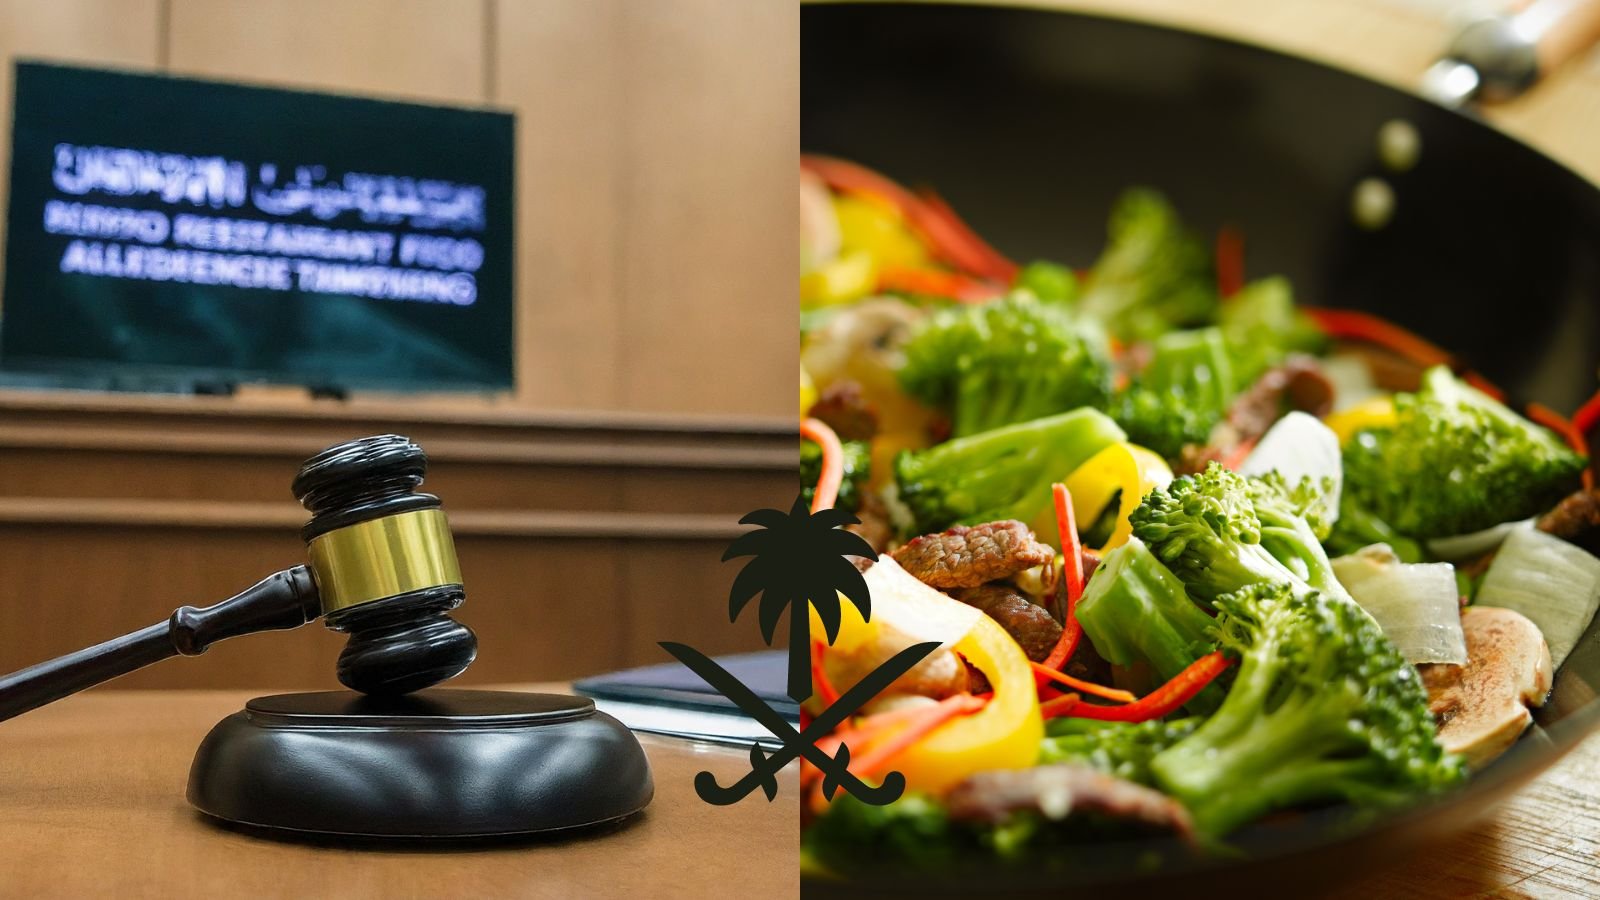 Read more about the article Riyadh Restaurant Food Poisoning Case: Anti-Corruption Authority Uncovers Attempted Evidence Tampering